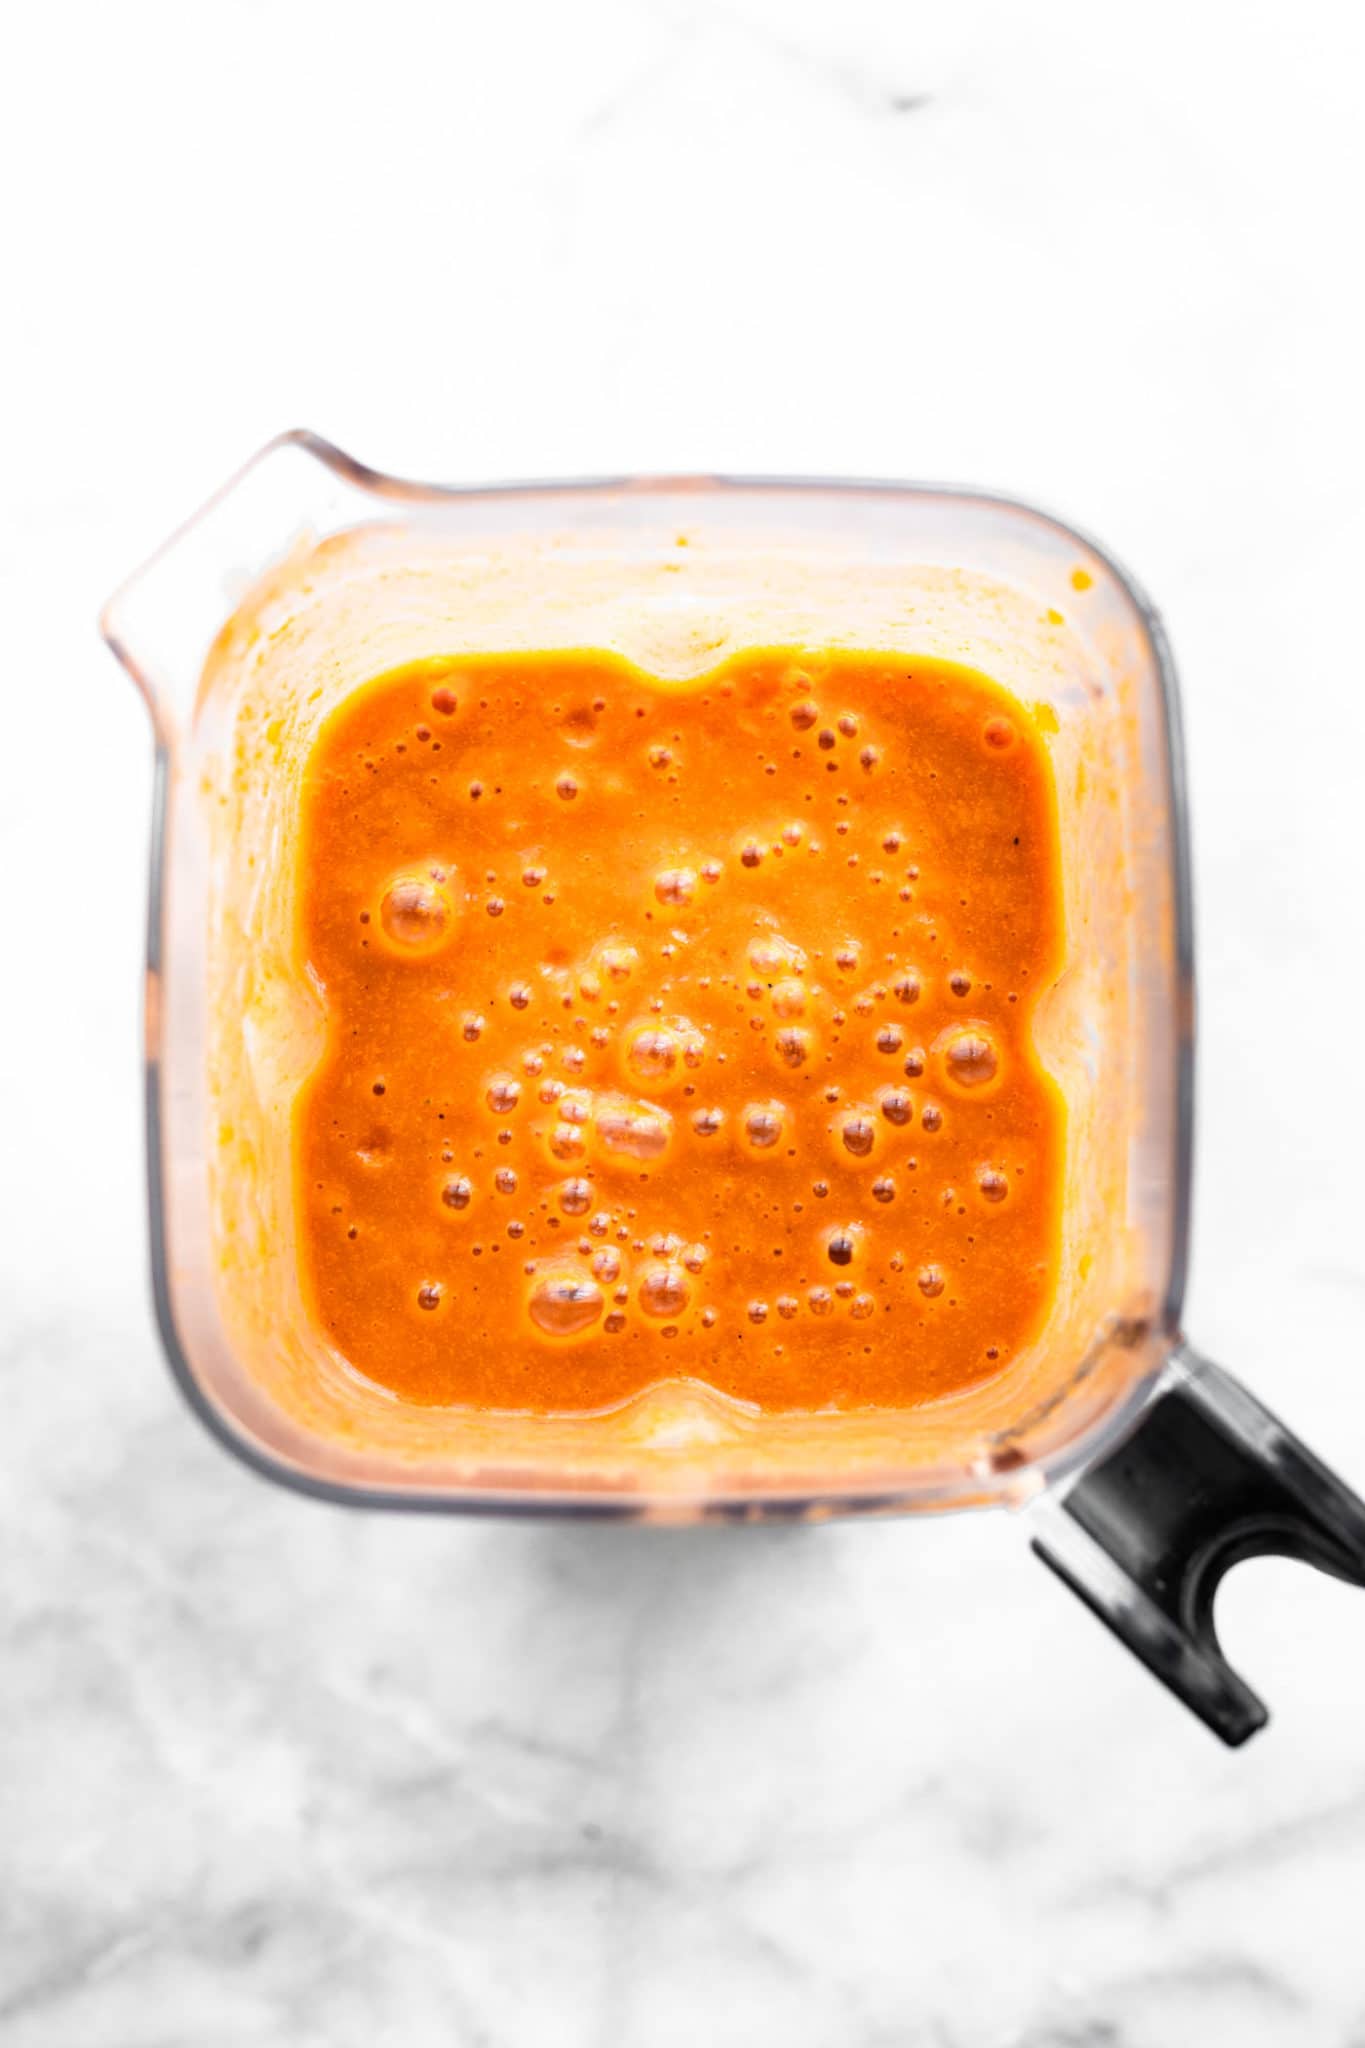 tomato crab bisque base being pureed in a blender